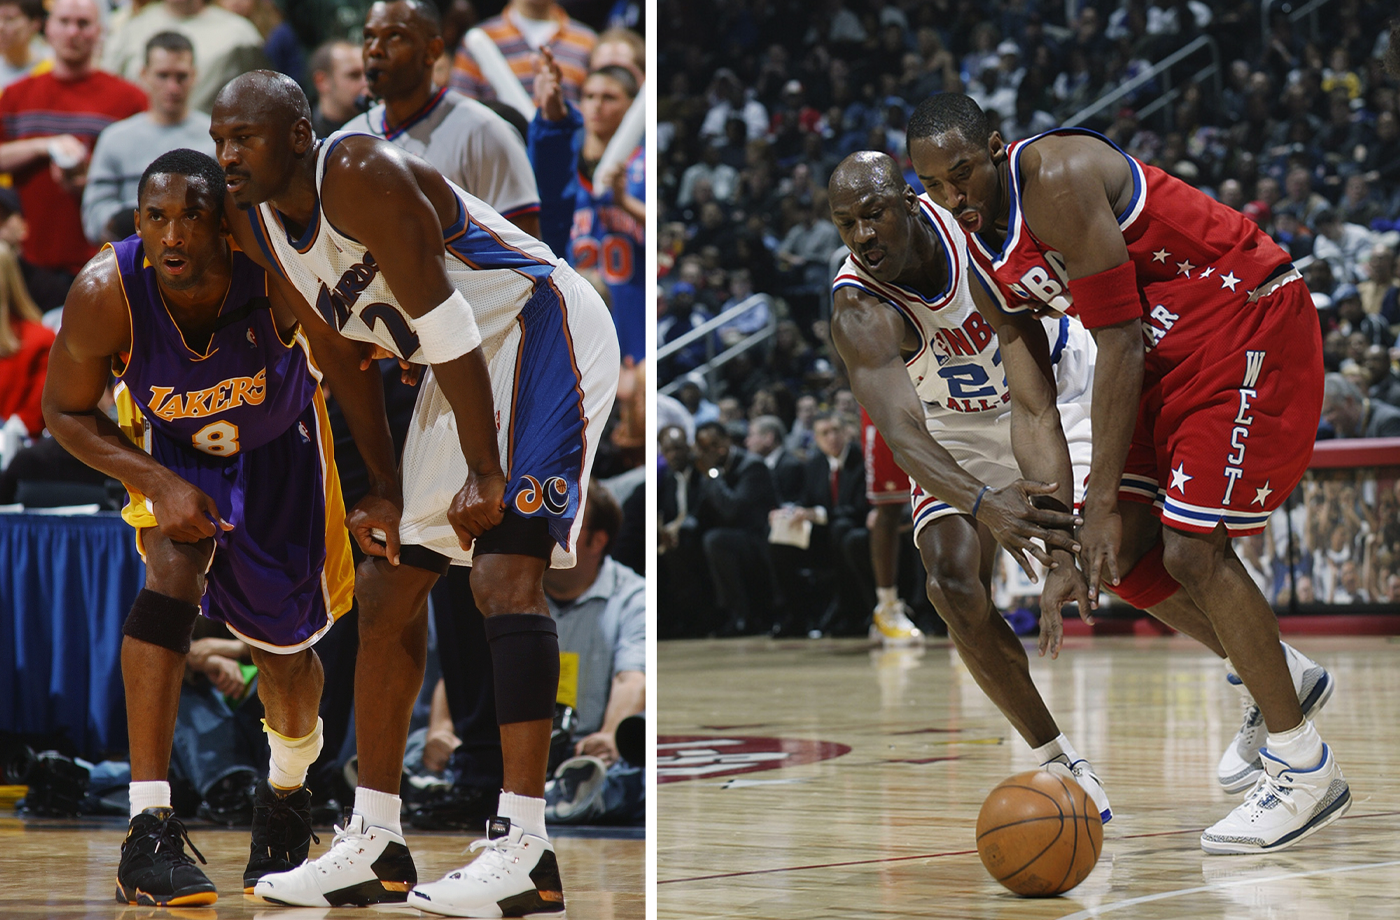 Top 7 Shoes Worn By Kobe Bryant In His Final Season [PHOTOS